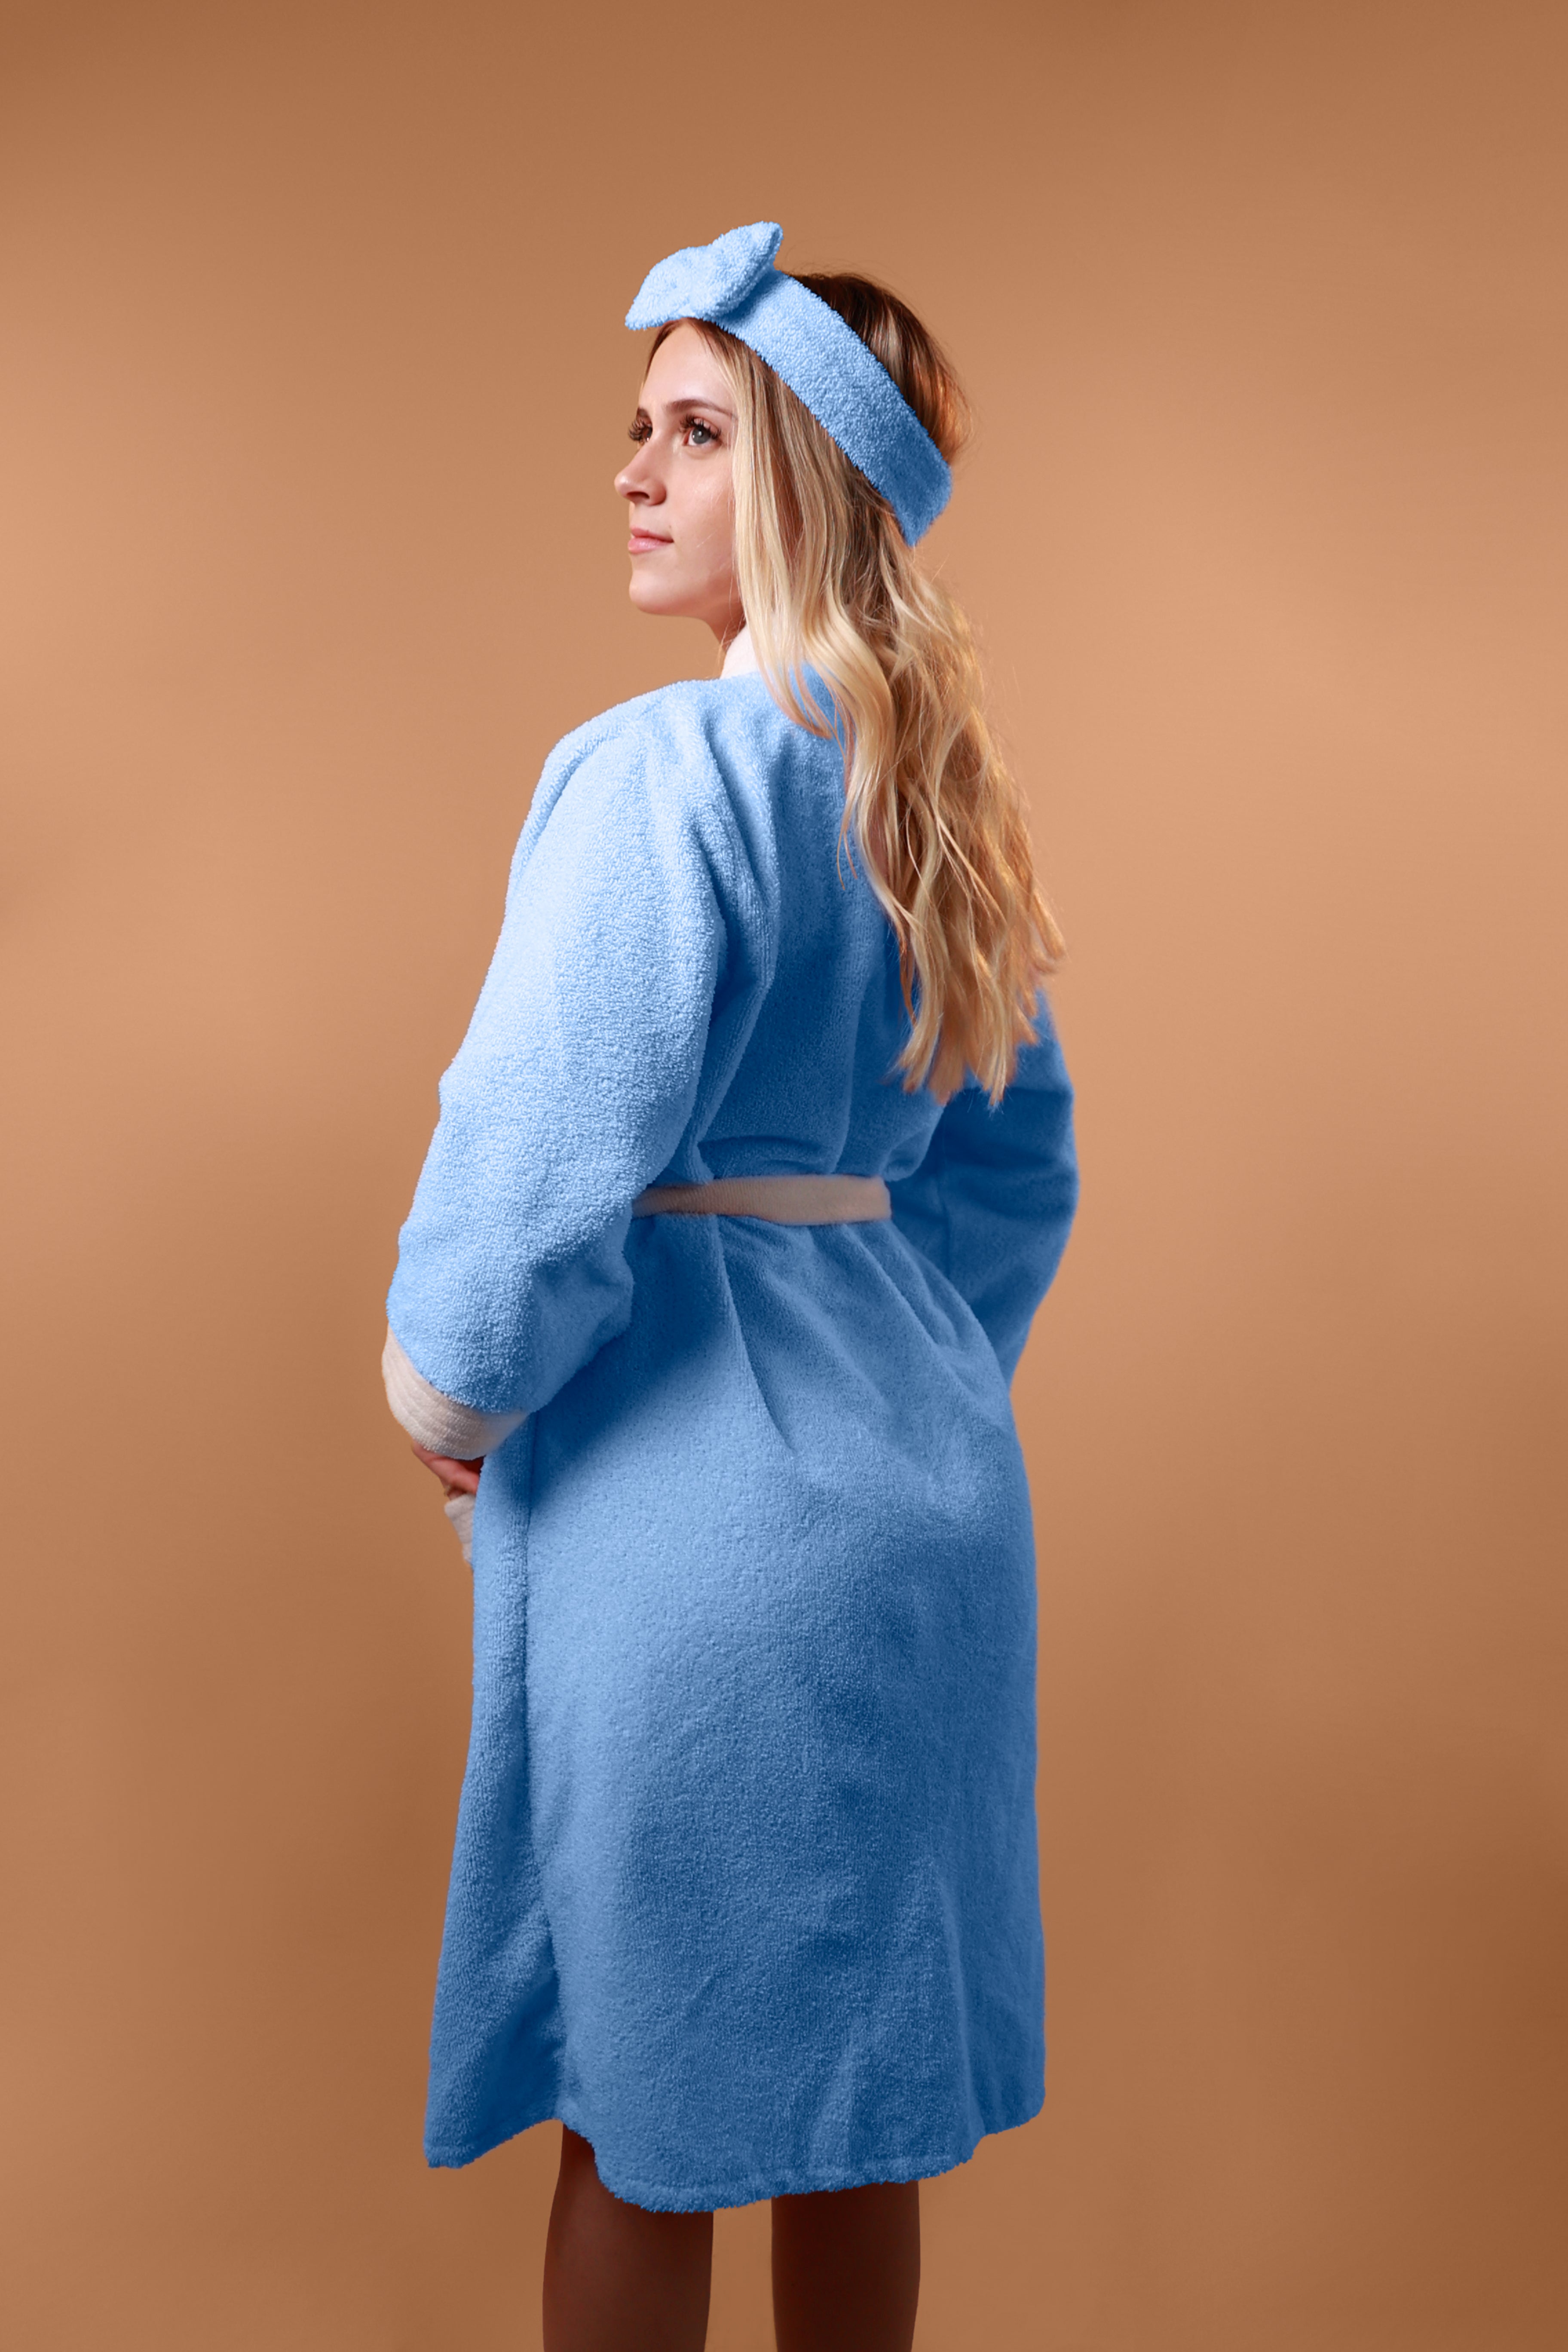 Choosing isolation gowns: How to know the right barrier protection